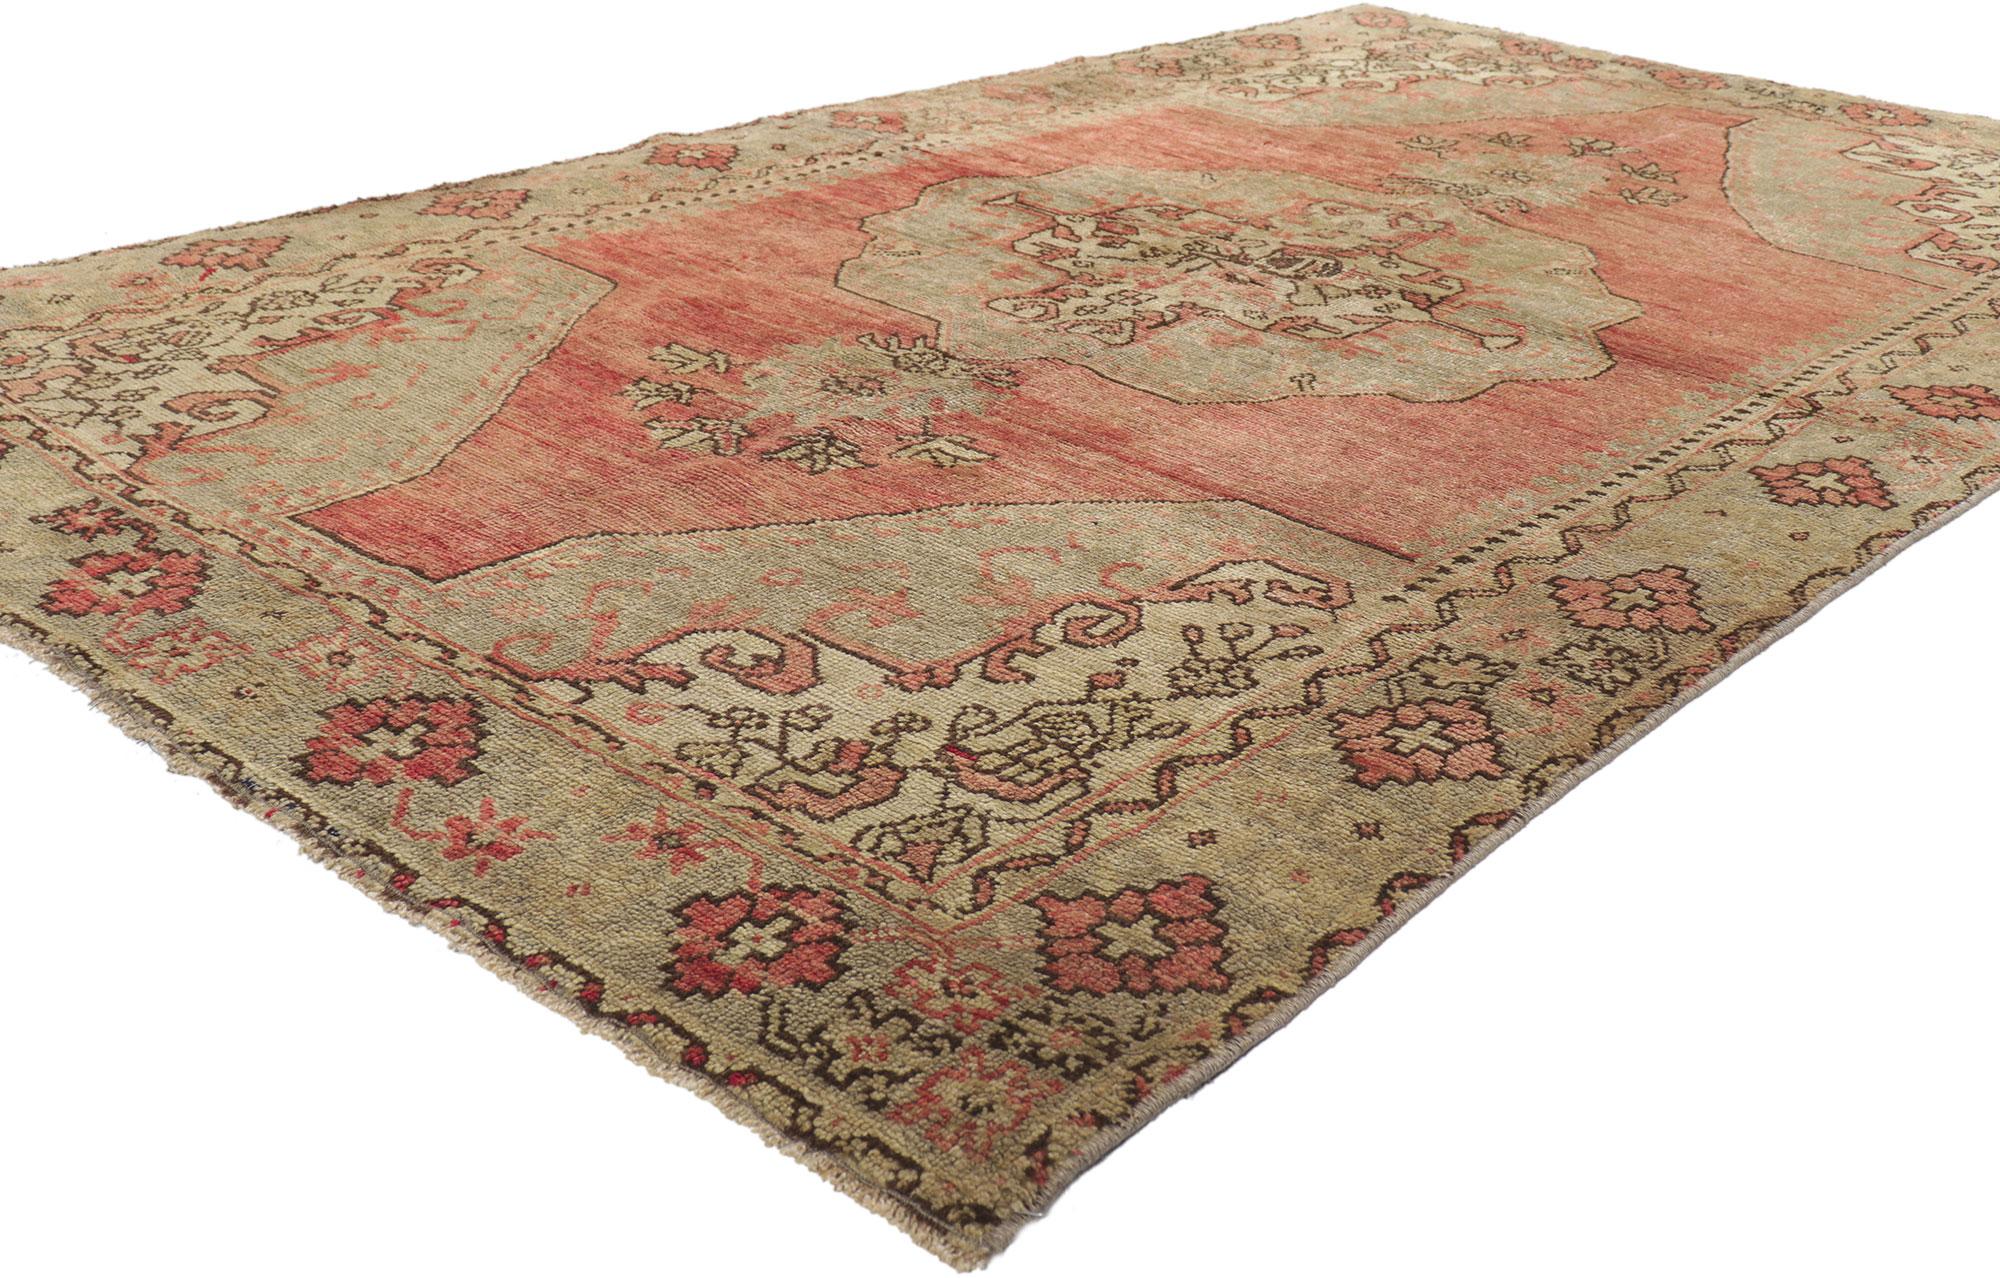 52352 Vintage Turkish Oushak Rug, 04'08 x 08'01.
Complete with coziness, texture and versatile rustic style, this hand knotted wool vintage Turkish Oushak rug features a large scalloped center medallion with palmette and bloom pendants across an